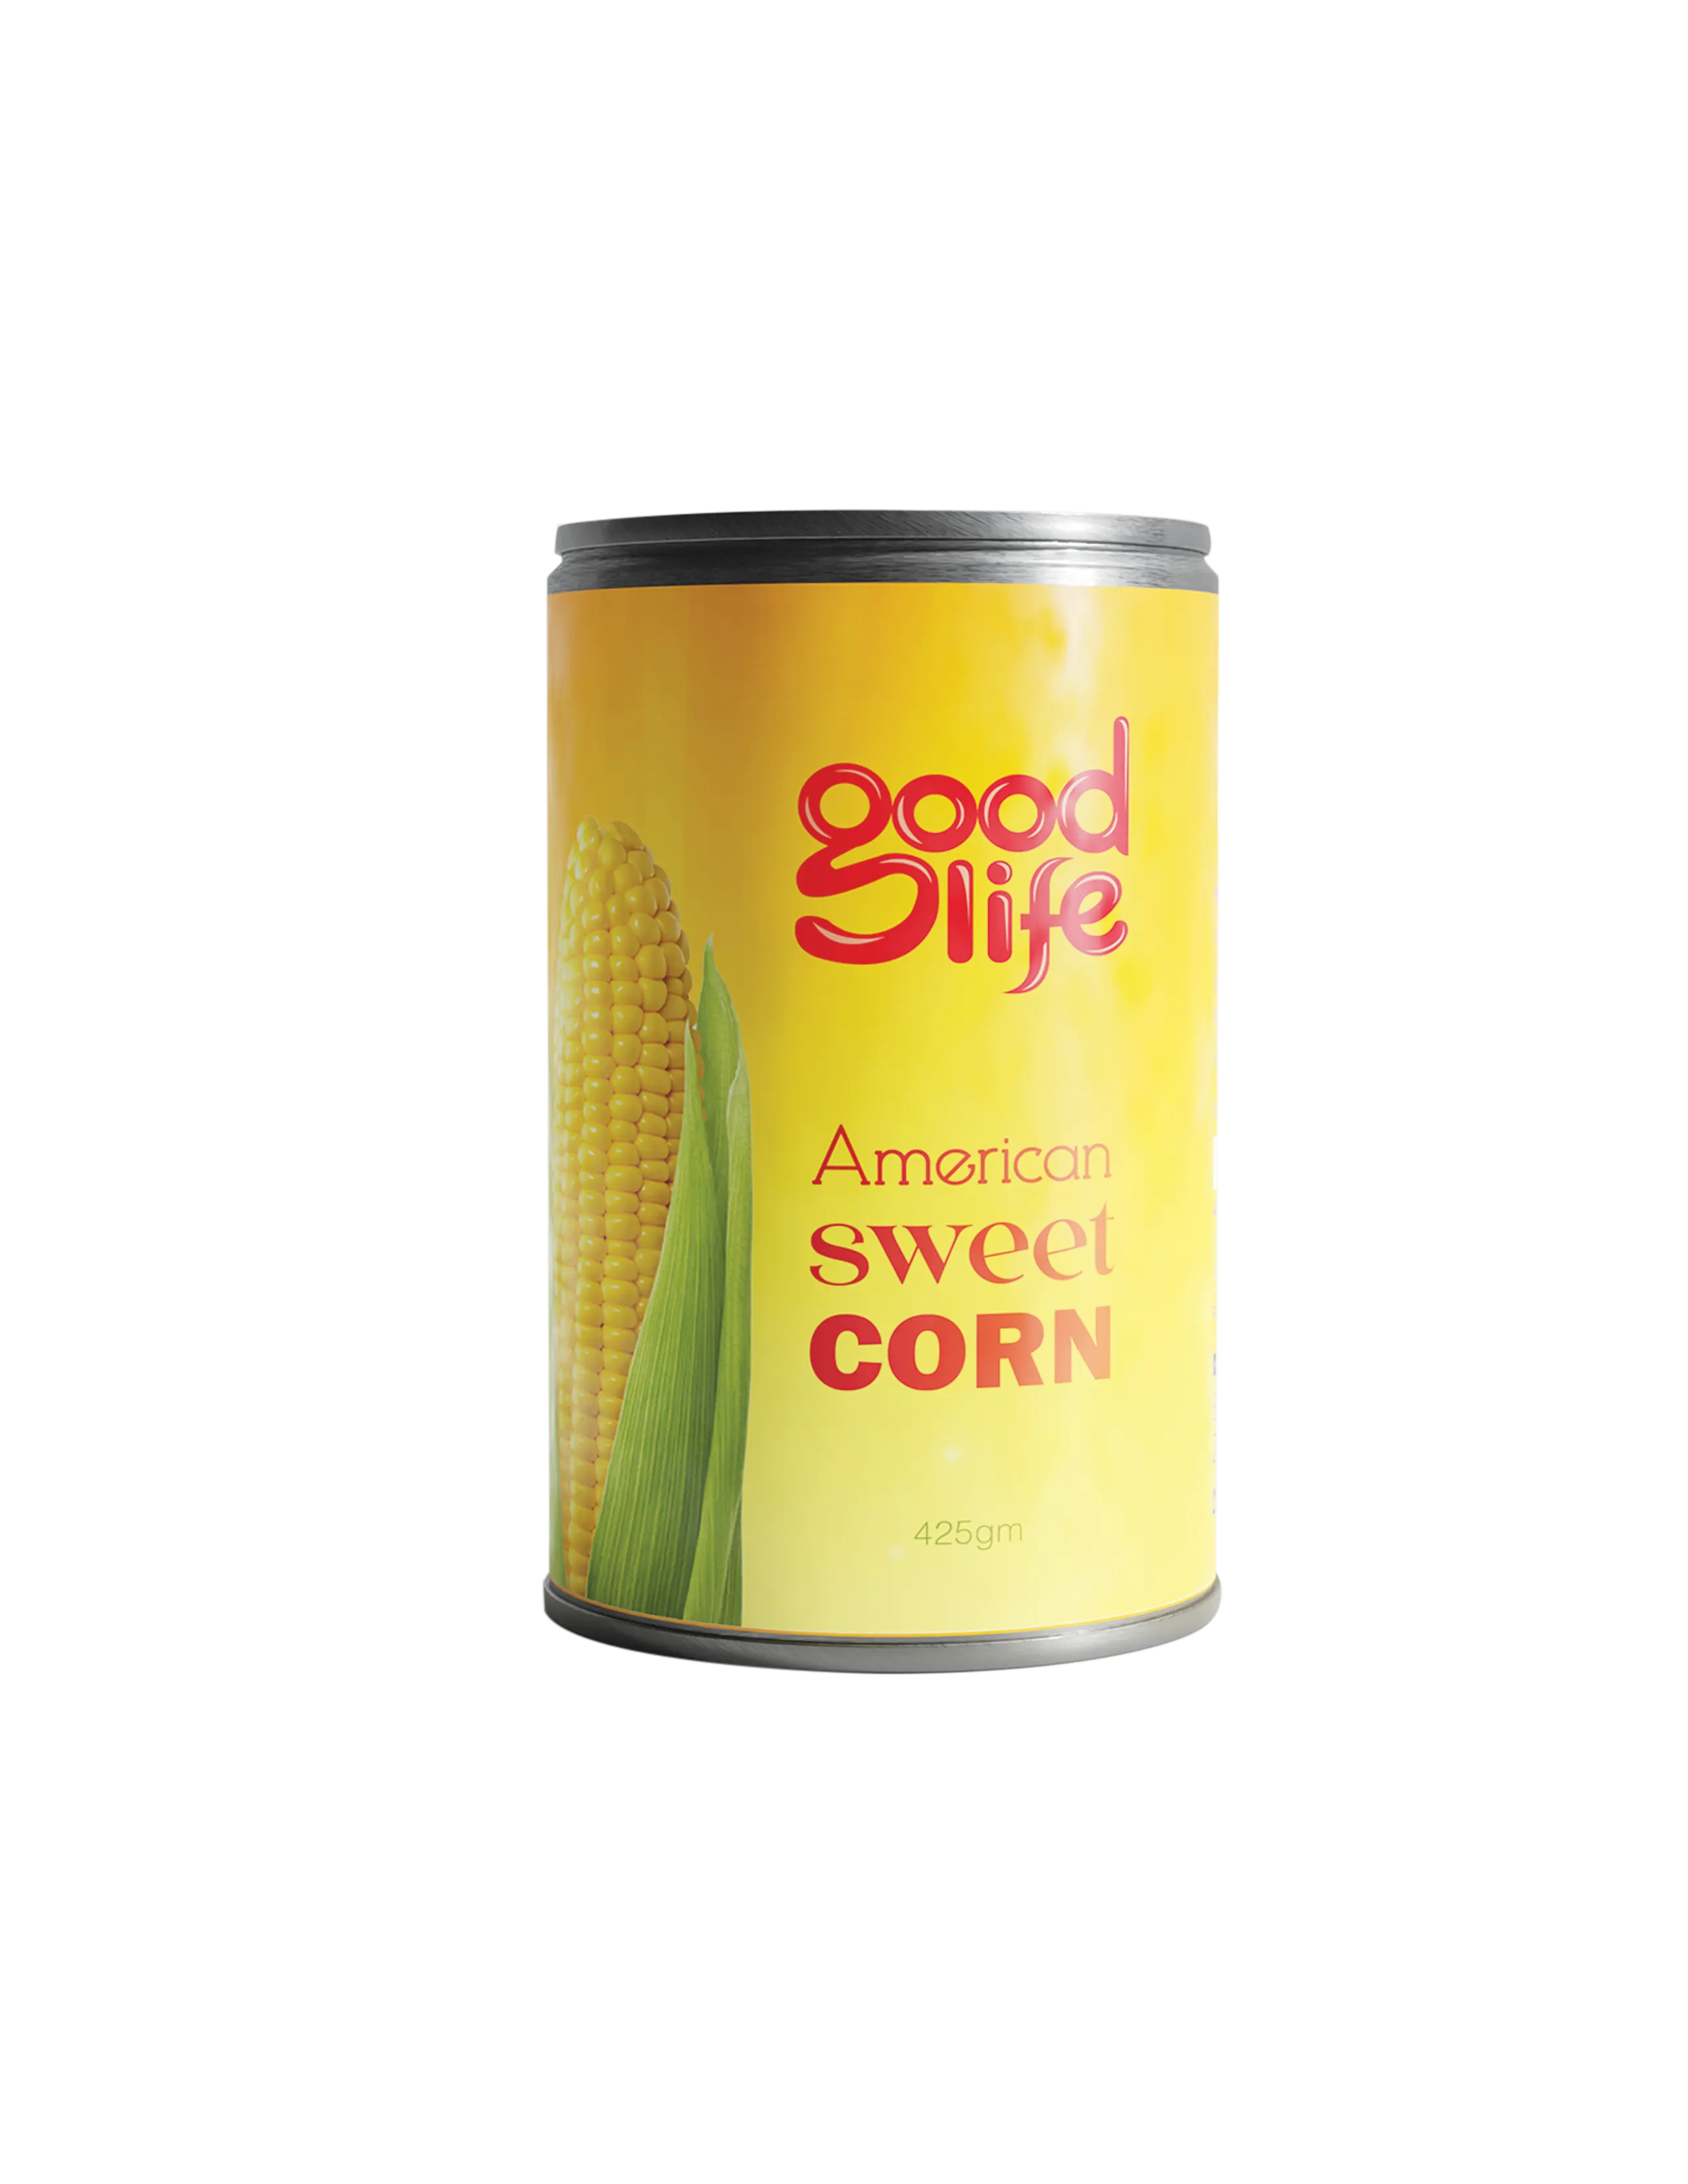 Wholesale American Sweet Corn 425g Best Quality Canned Whole Kernel Sweet Corn From Indian Manufacturer